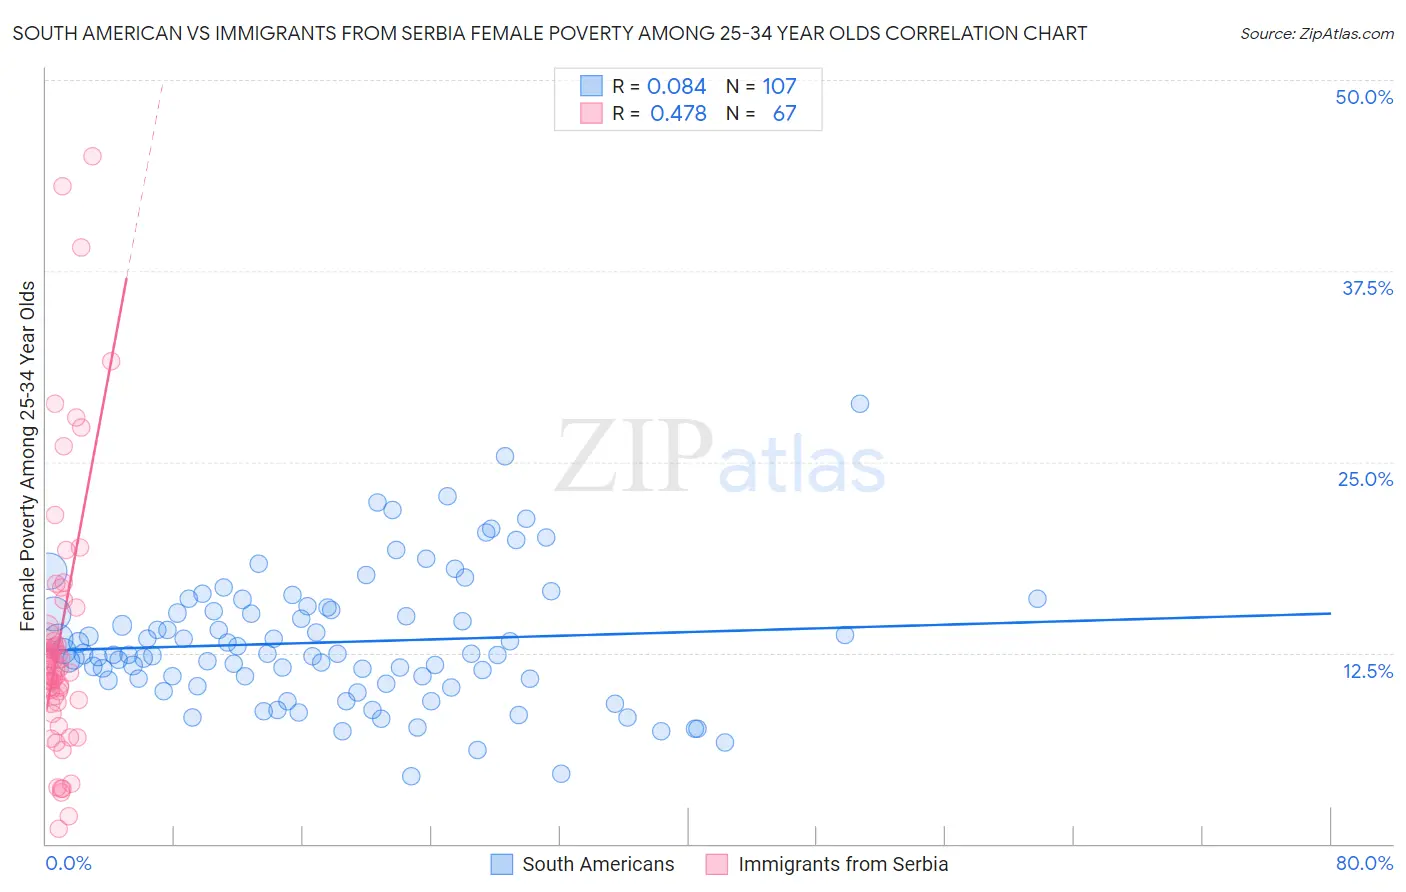 South American vs Immigrants from Serbia Female Poverty Among 25-34 Year Olds